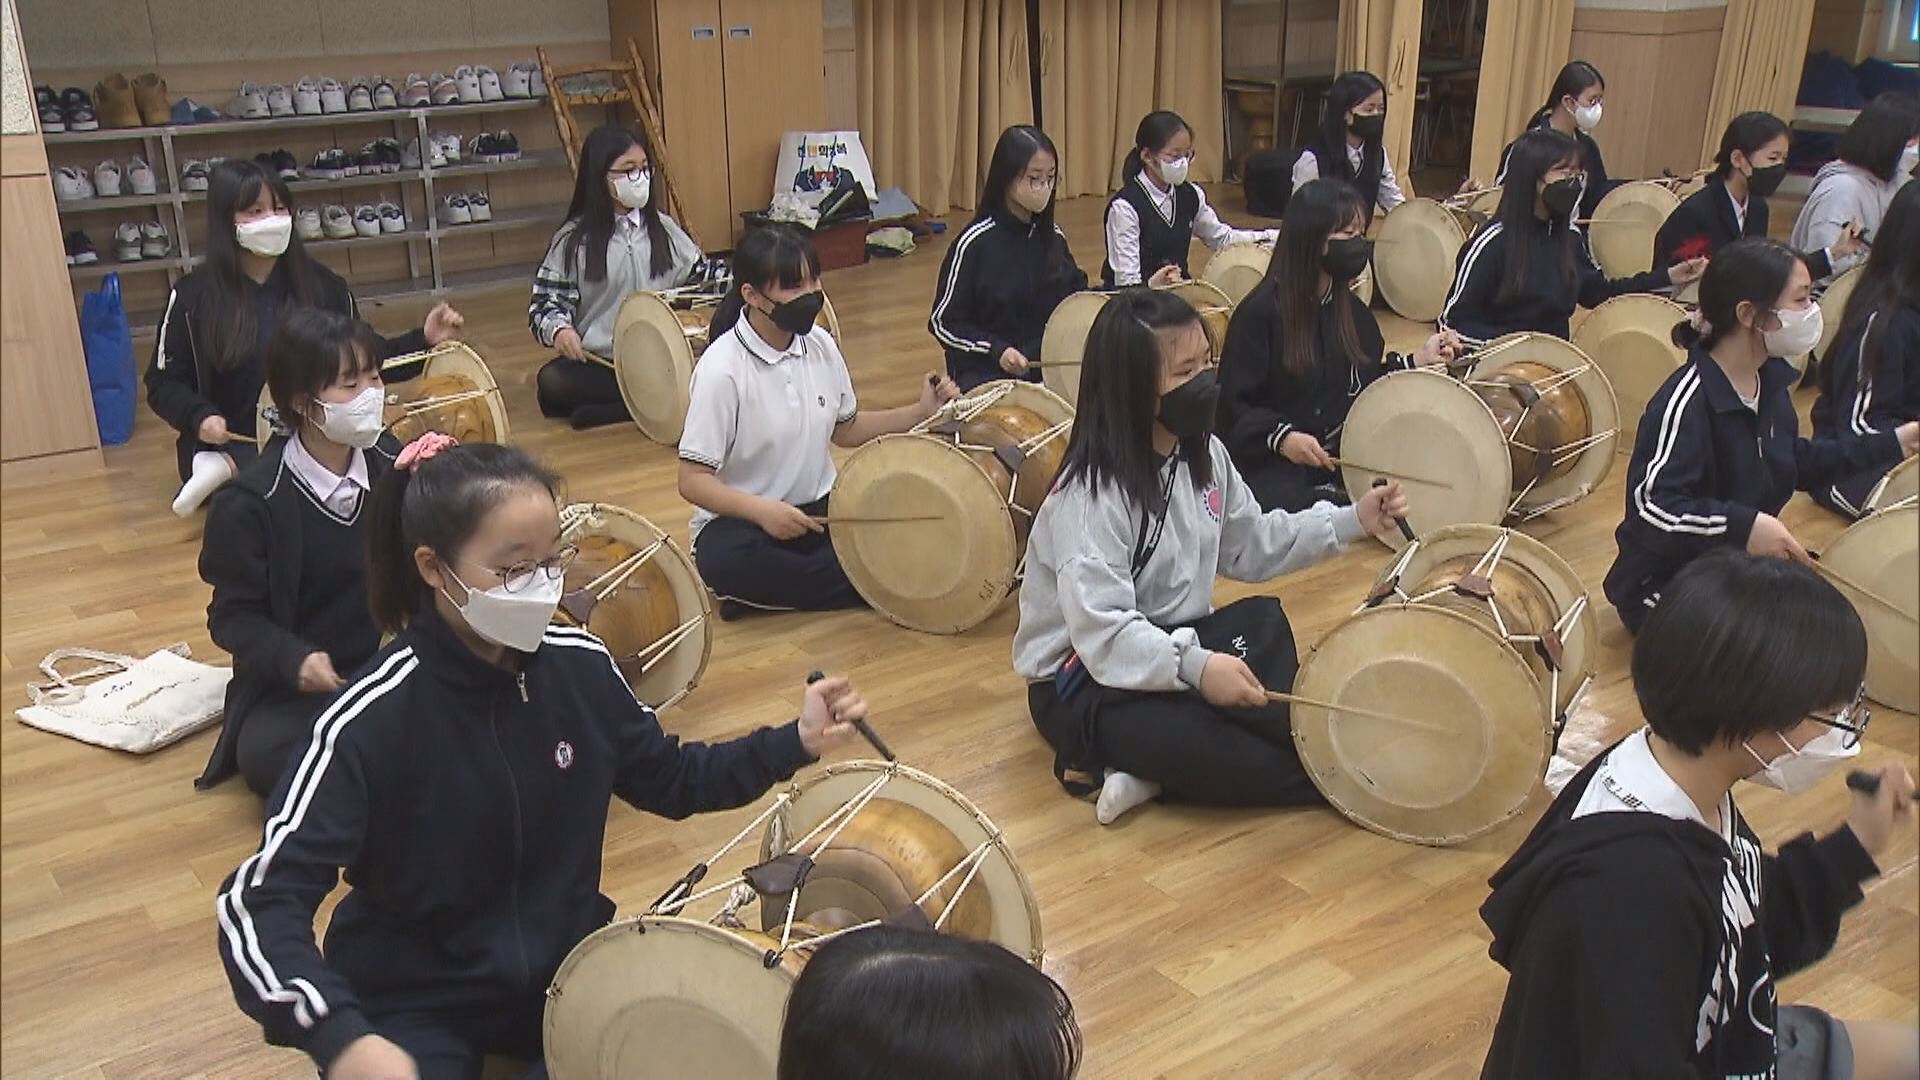 SPECULATIONS OVER TRADITIONAL MUSIC EDUCATION